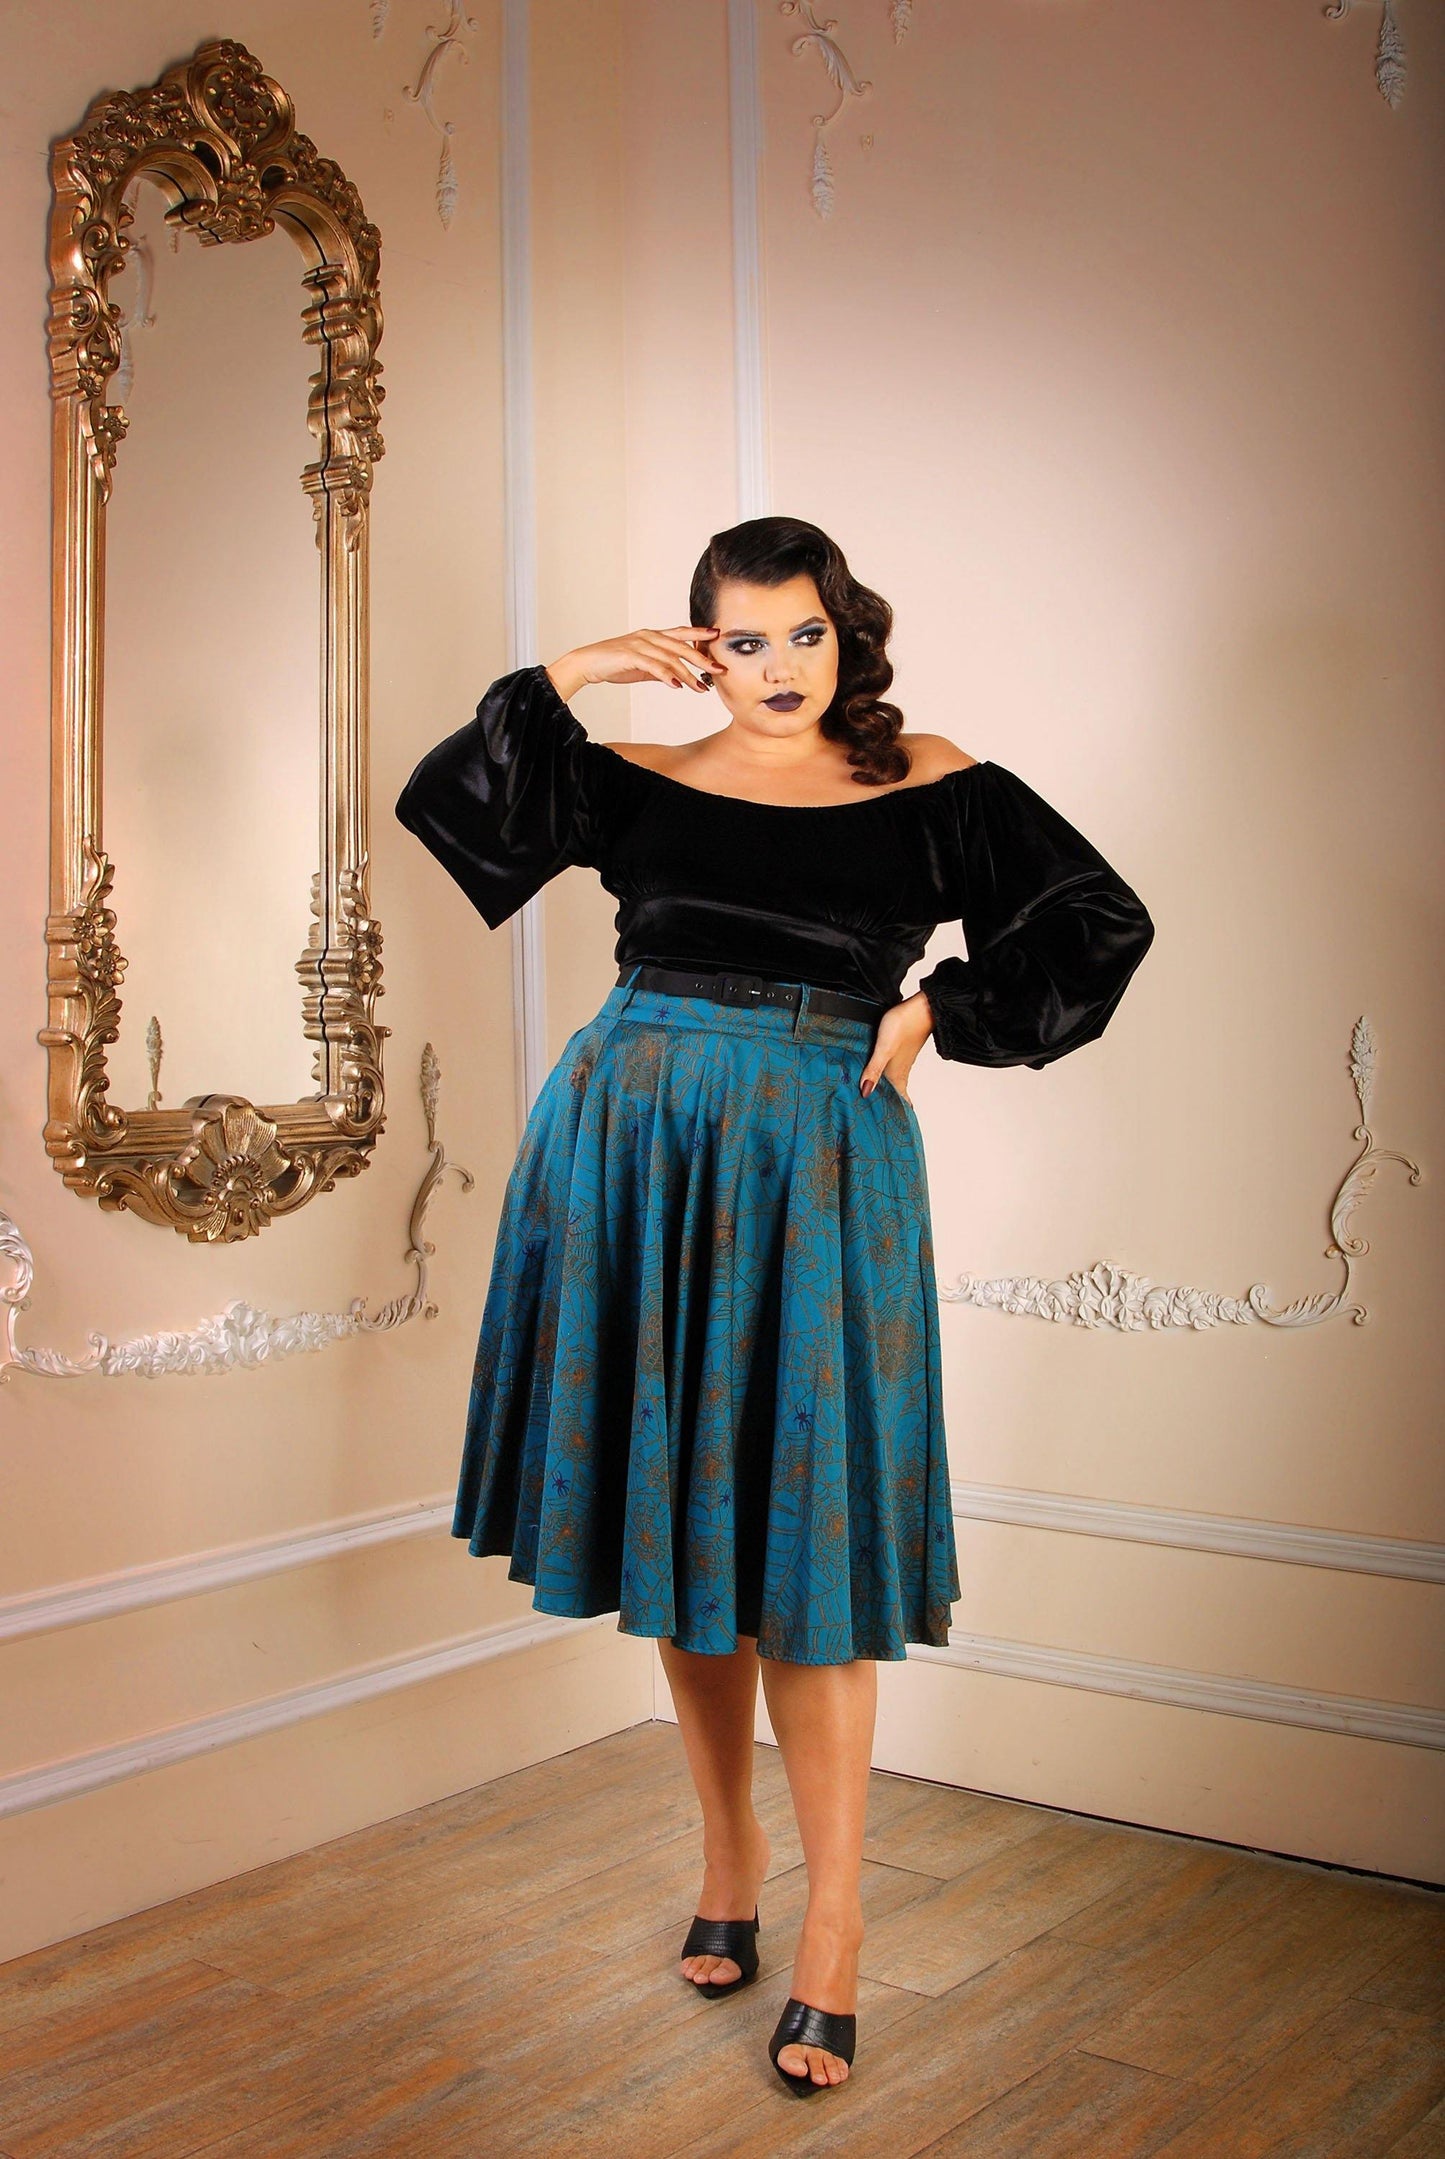 Swann Long Sleeve Peasant Top in Black Stretch Velvet | Pinup Couture - pinupgirlclothing.com